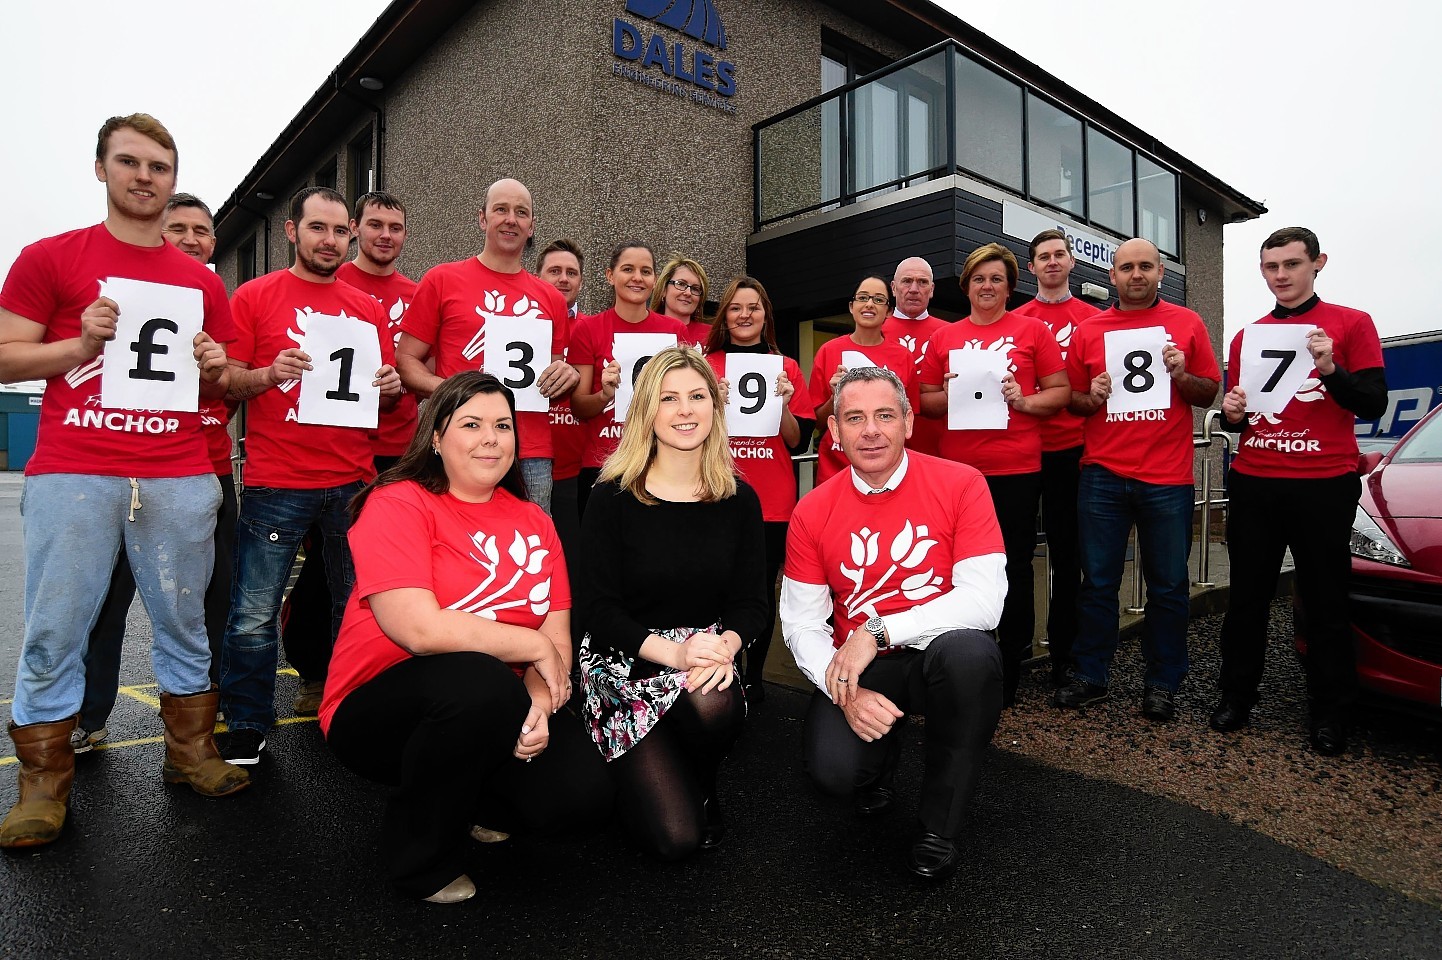 Staff at Dales Engineering, Peterhead, who raised £13096.87 for Friends of Anchor